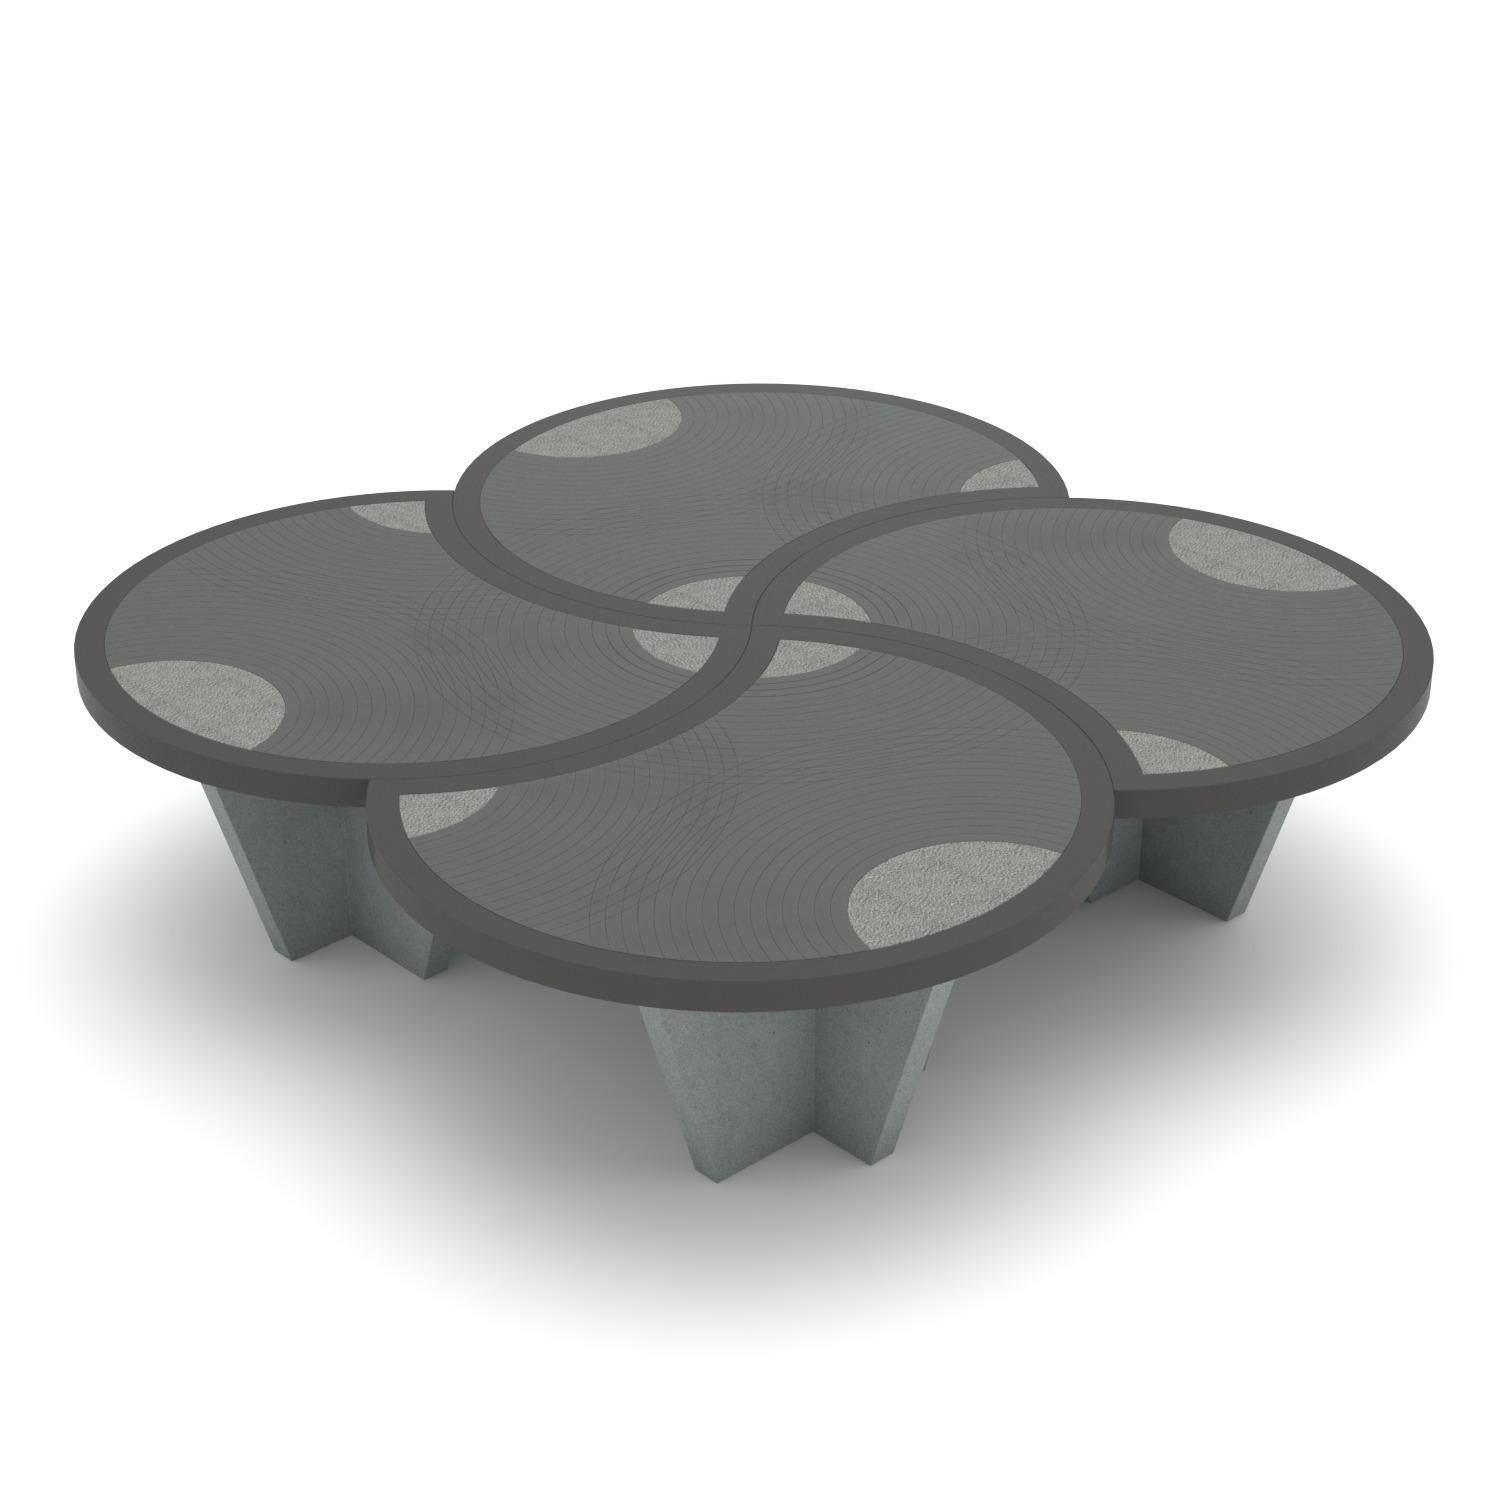 A design coffee table in pietra serena with water-jet decoration, Kimono can be used individually or combined in compositions of several pieces. Indeed, the union of four components allows you to appreciate the complete design, an interpretation of